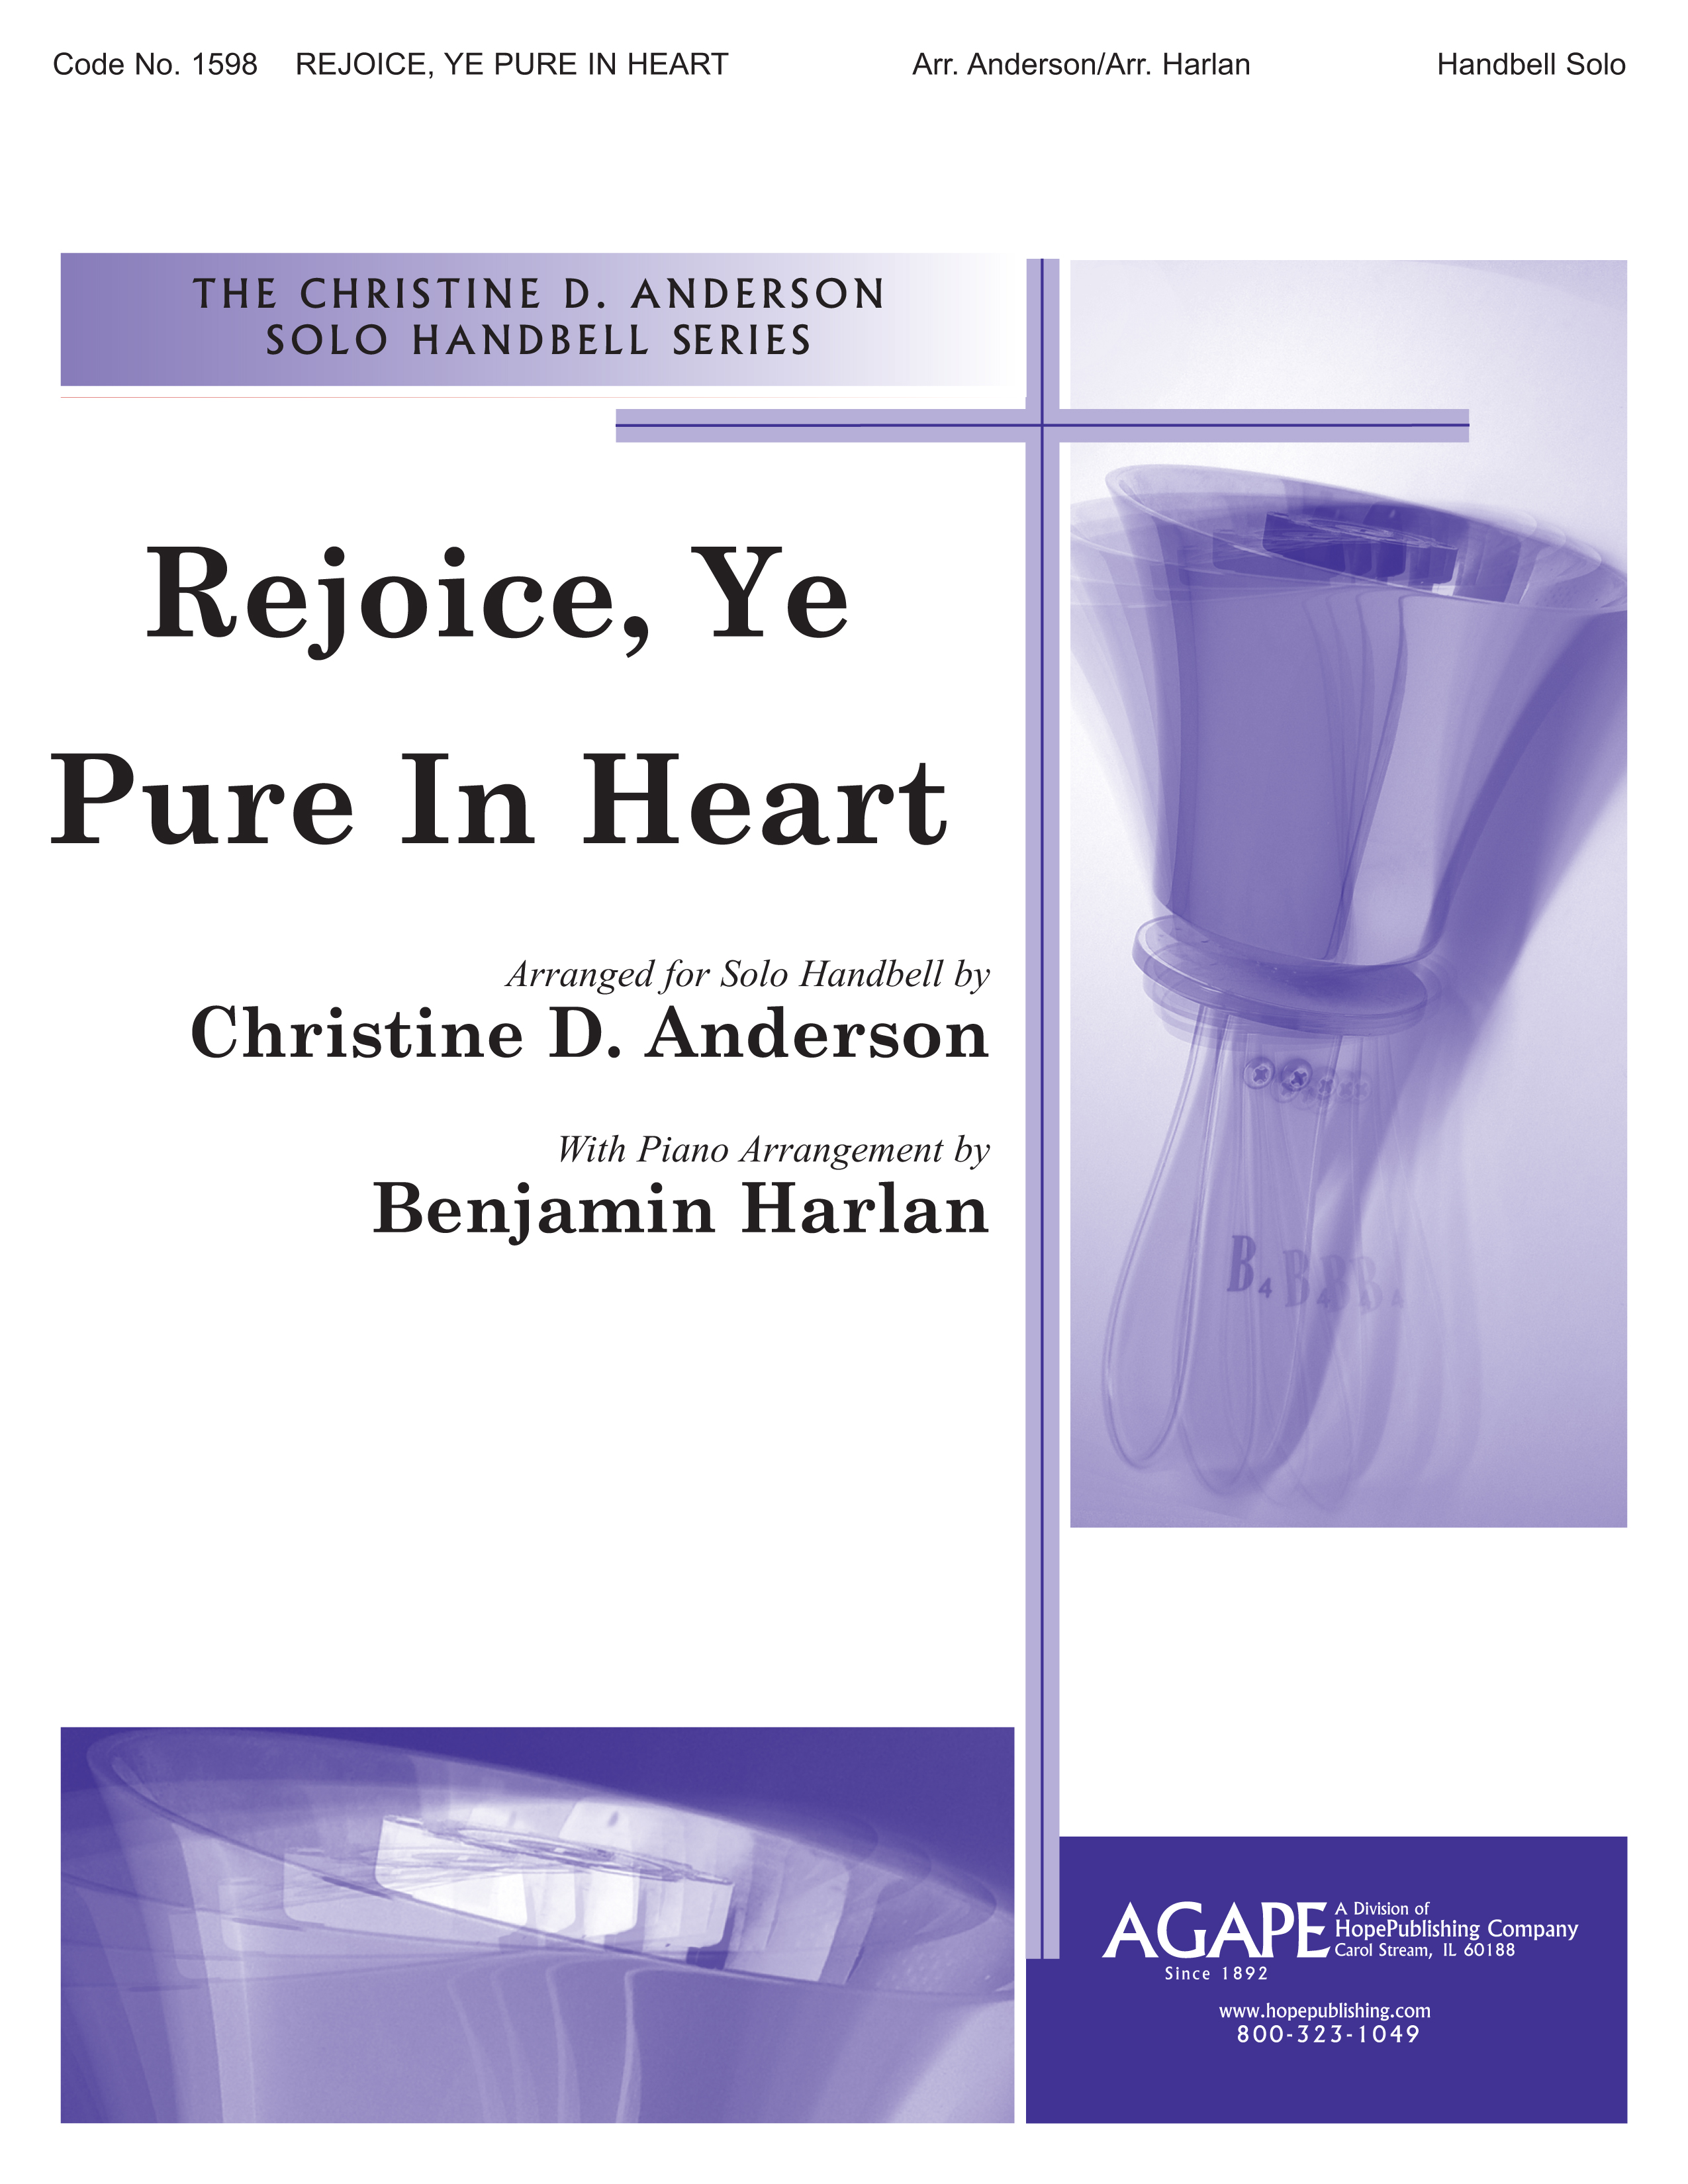 Rejoice Ye Pure in Heart - Handbell Solo Cover Image